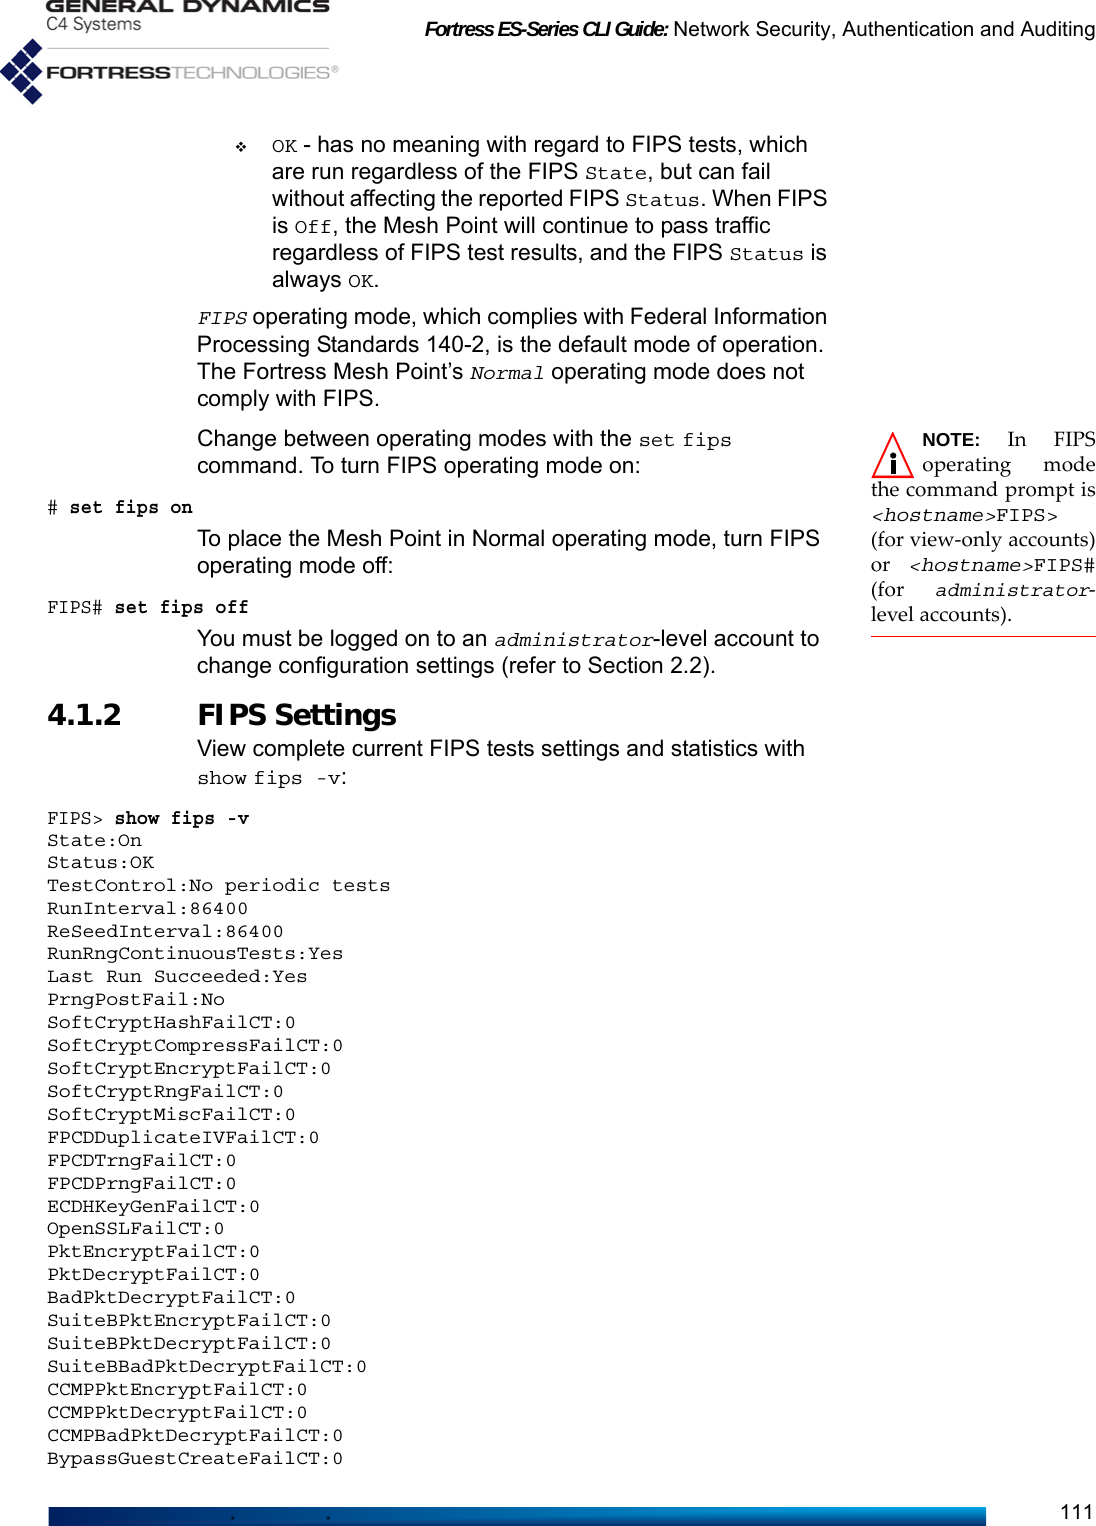 Fortress ES-Series CLI Guide: Network Security, Authentication and Auditing111OK - has no meaning with regard to FIPS tests, which are run regardless of the FIPS State, but can fail without affecting the reported FIPS Status. When FIPS is Off, the Mesh Point will continue to pass traffic regardless of FIPS test results, and the FIPS Status is always OK.FIPS operating mode, which complies with Federal Information Processing Standards 140-2, is the default mode of operation. The Fortress Mesh Point’s Normal operating mode does not comply with FIPS. NOTE: In FIPSoperating modethe command prompt is&lt;hostname&gt;FIPS&gt;(for view-only accounts)or  &lt;hostname&gt;FIPS#(for  administrator-level accounts).Change between operating modes with the set fips command. To turn FIPS operating mode on:# set fips onTo place the Mesh Point in Normal operating mode, turn FIPS operating mode off:FIPS# set fips offYou must be logged on to an administrator-level account to change configuration settings (refer to Section 2.2).4.1.2 FIPS Settings View complete current FIPS tests settings and statistics with show fips -v:FIPS&gt; show fips -vState:OnStatus:OKTestControl:No periodic testsRunInterval:86400ReSeedInterval:86400RunRngContinuousTests:YesLast Run Succeeded:YesPrngPostFail:NoSoftCryptHashFailCT:0SoftCryptCompressFailCT:0SoftCryptEncryptFailCT:0SoftCryptRngFailCT:0SoftCryptMiscFailCT:0FPCDDuplicateIVFailCT:0FPCDTrngFailCT:0FPCDPrngFailCT:0ECDHKeyGenFailCT:0OpenSSLFailCT:0PktEncryptFailCT:0PktDecryptFailCT:0BadPktDecryptFailCT:0SuiteBPktEncryptFailCT:0SuiteBPktDecryptFailCT:0SuiteBBadPktDecryptFailCT:0CCMPPktEncryptFailCT:0CCMPPktDecryptFailCT:0CCMPBadPktDecryptFailCT:0BypassGuestCreateFailCT:0